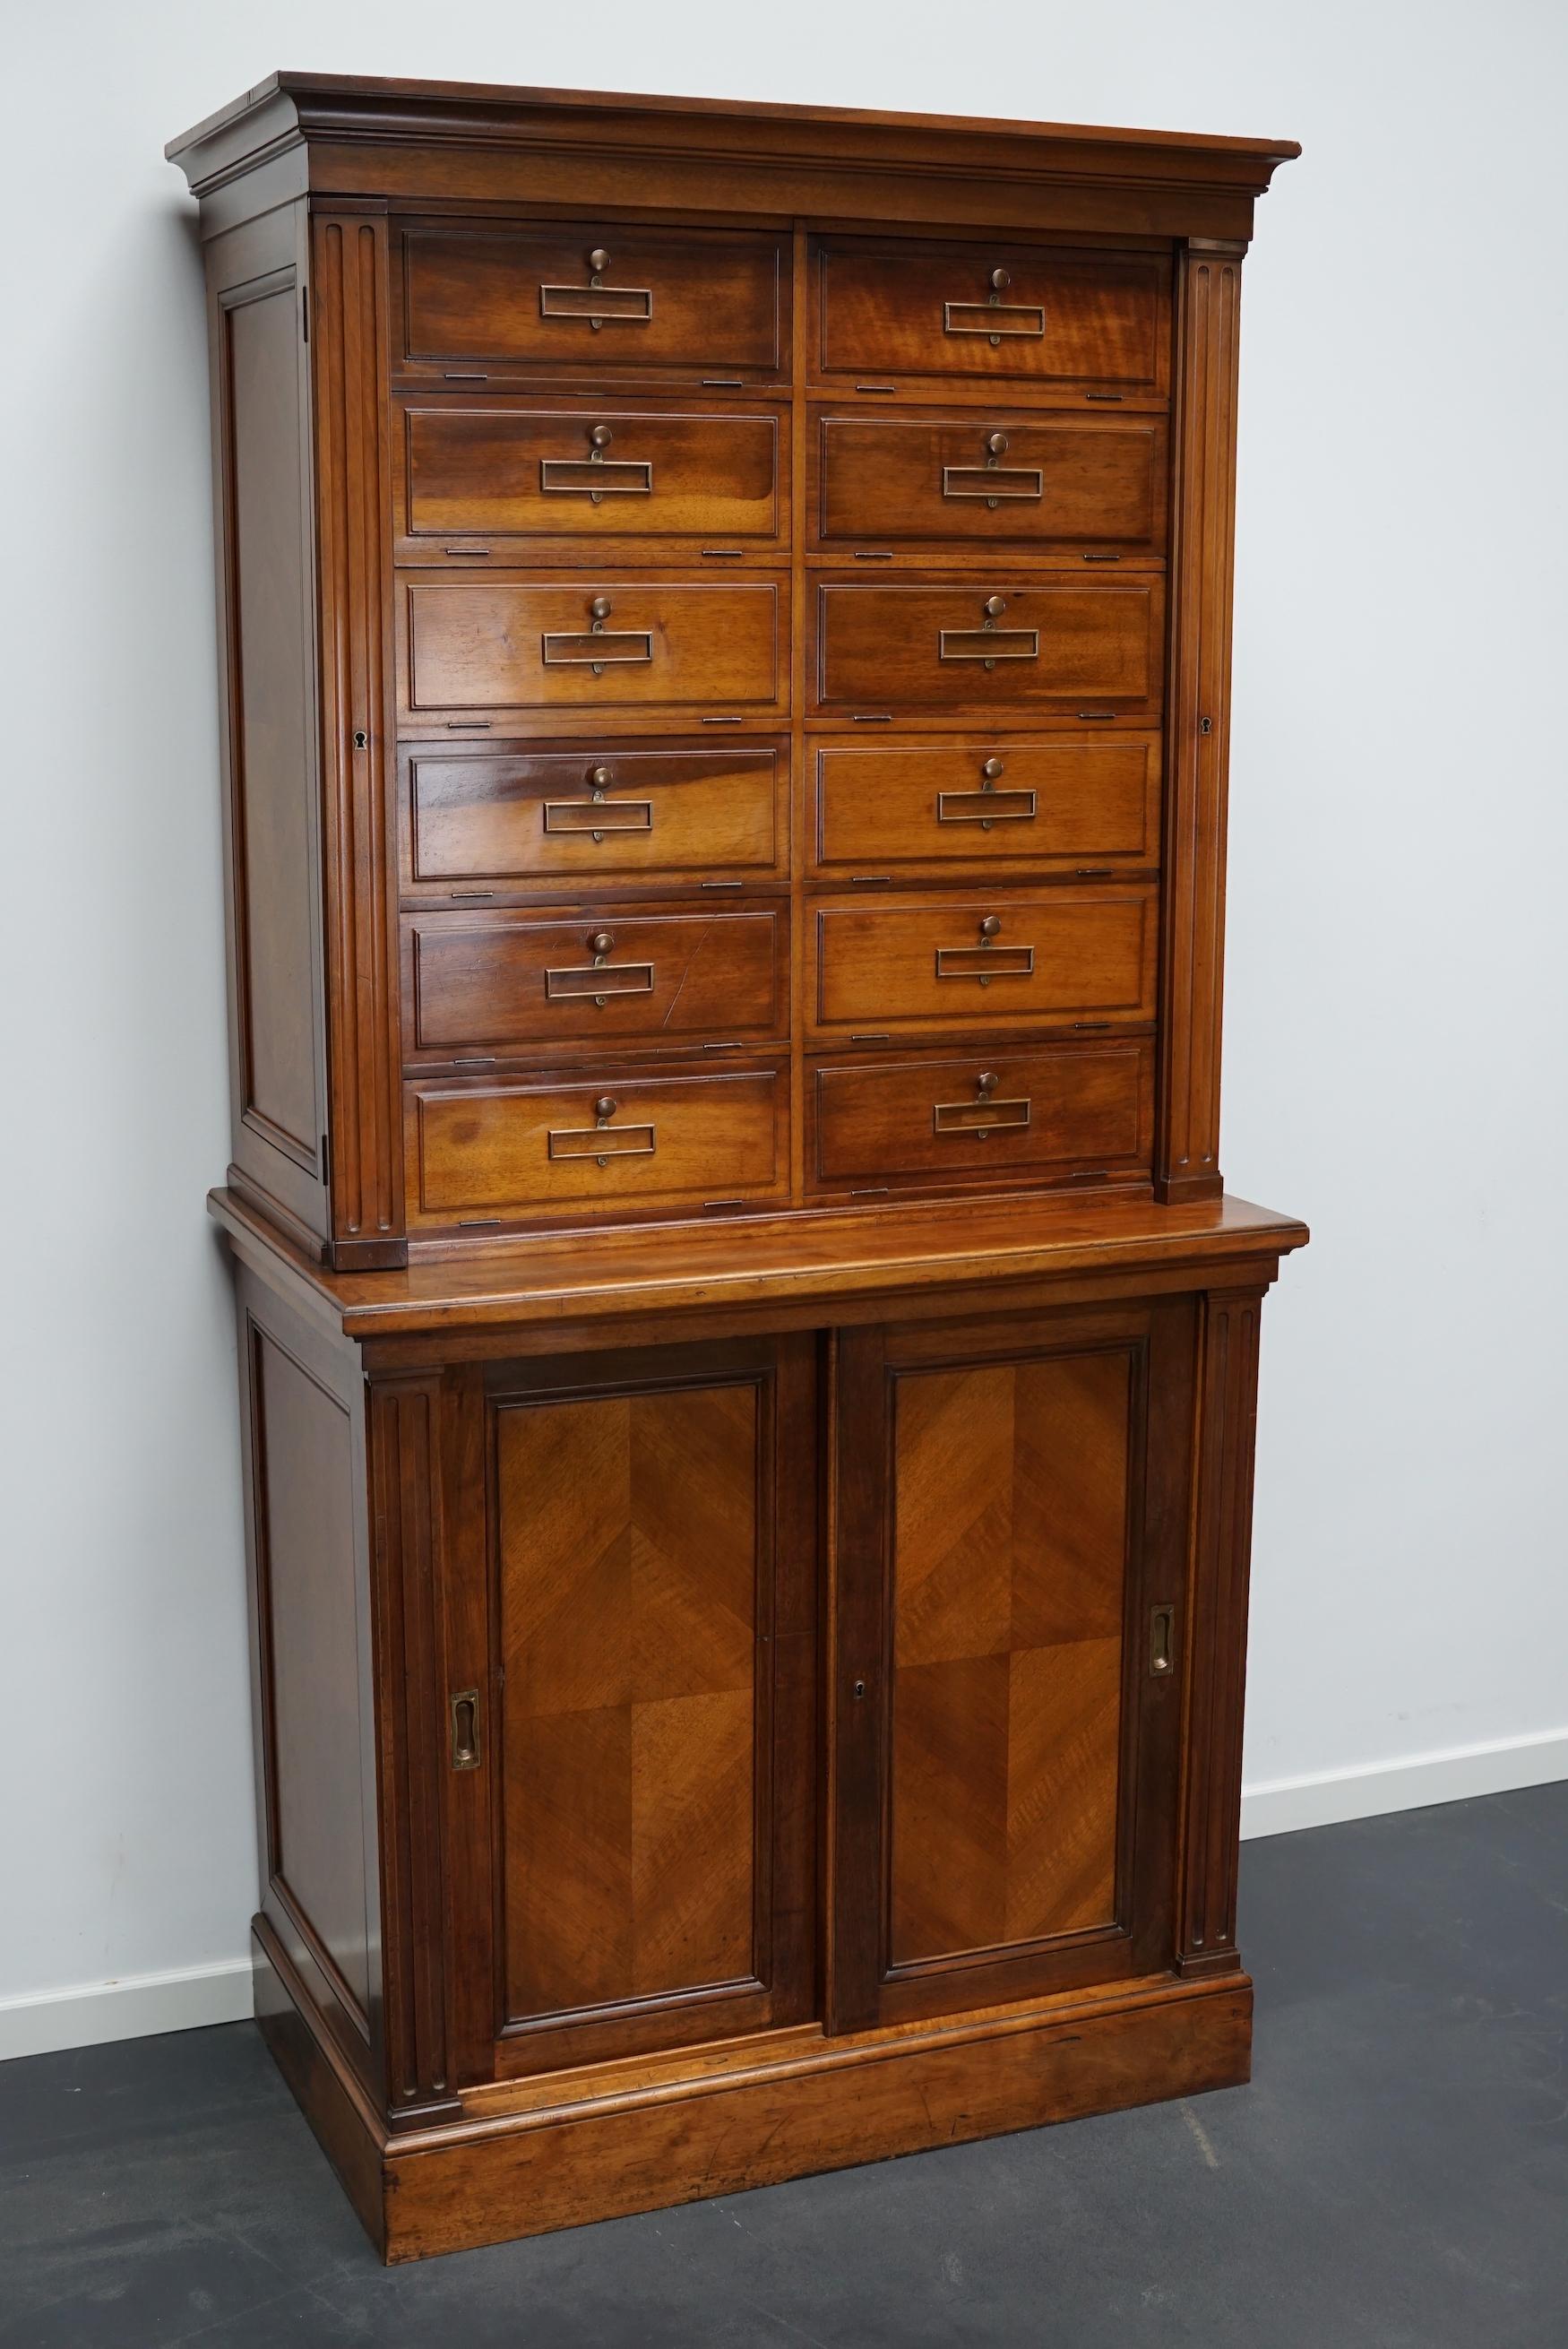 This filing cabinet was made around the 1920s in France. It is made from solid walnut with drop down doors, two sliding doors and brass hardware. It was used in Banque de France in the city Rouen.